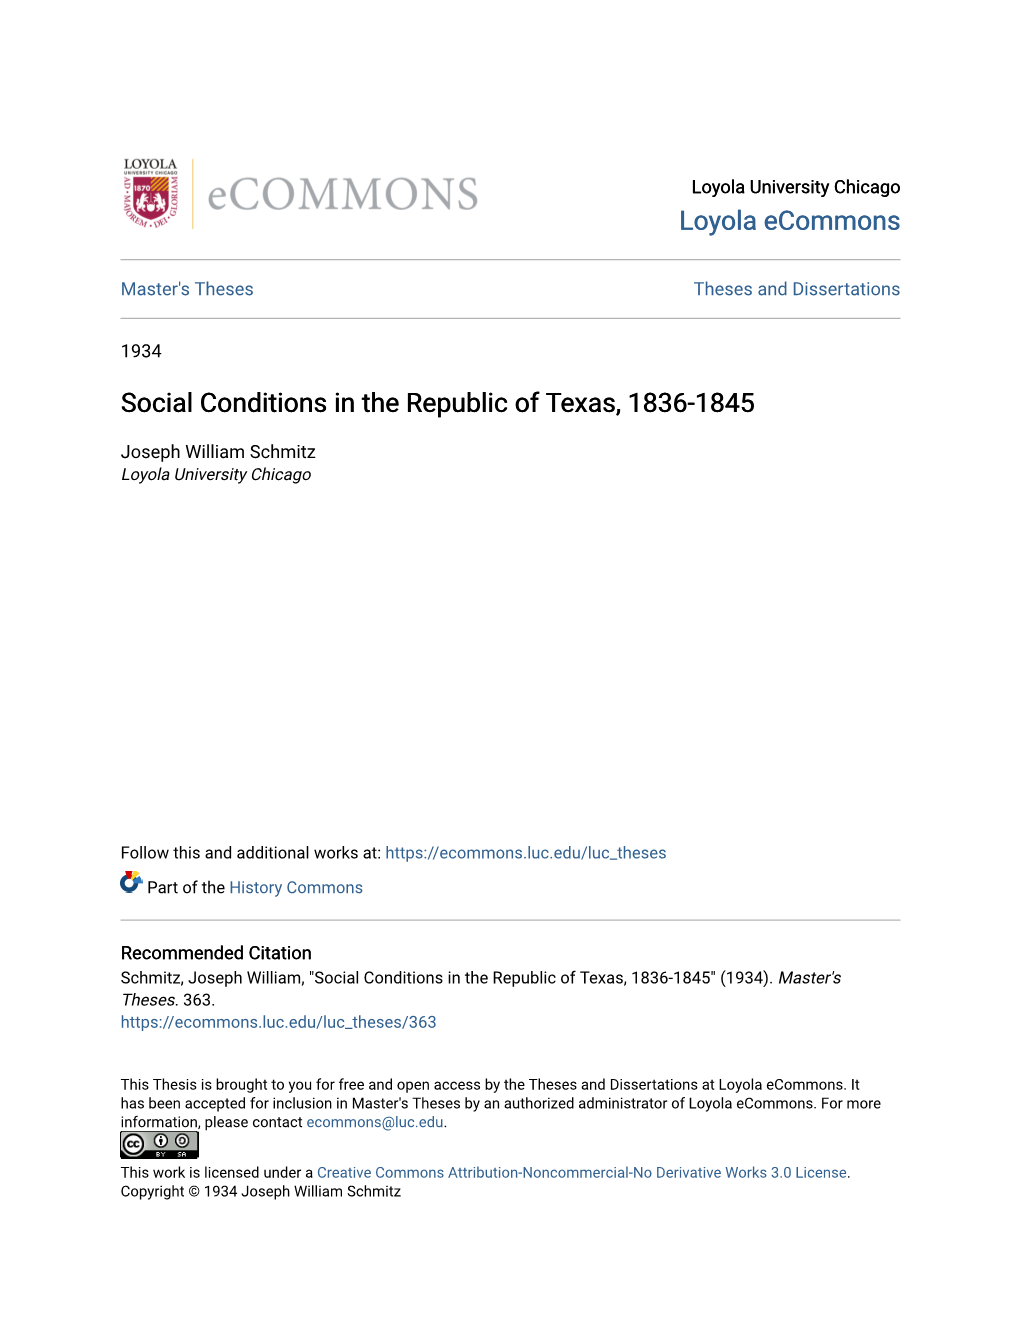 Social Conditions in the Republic of Texas, 1836-1845